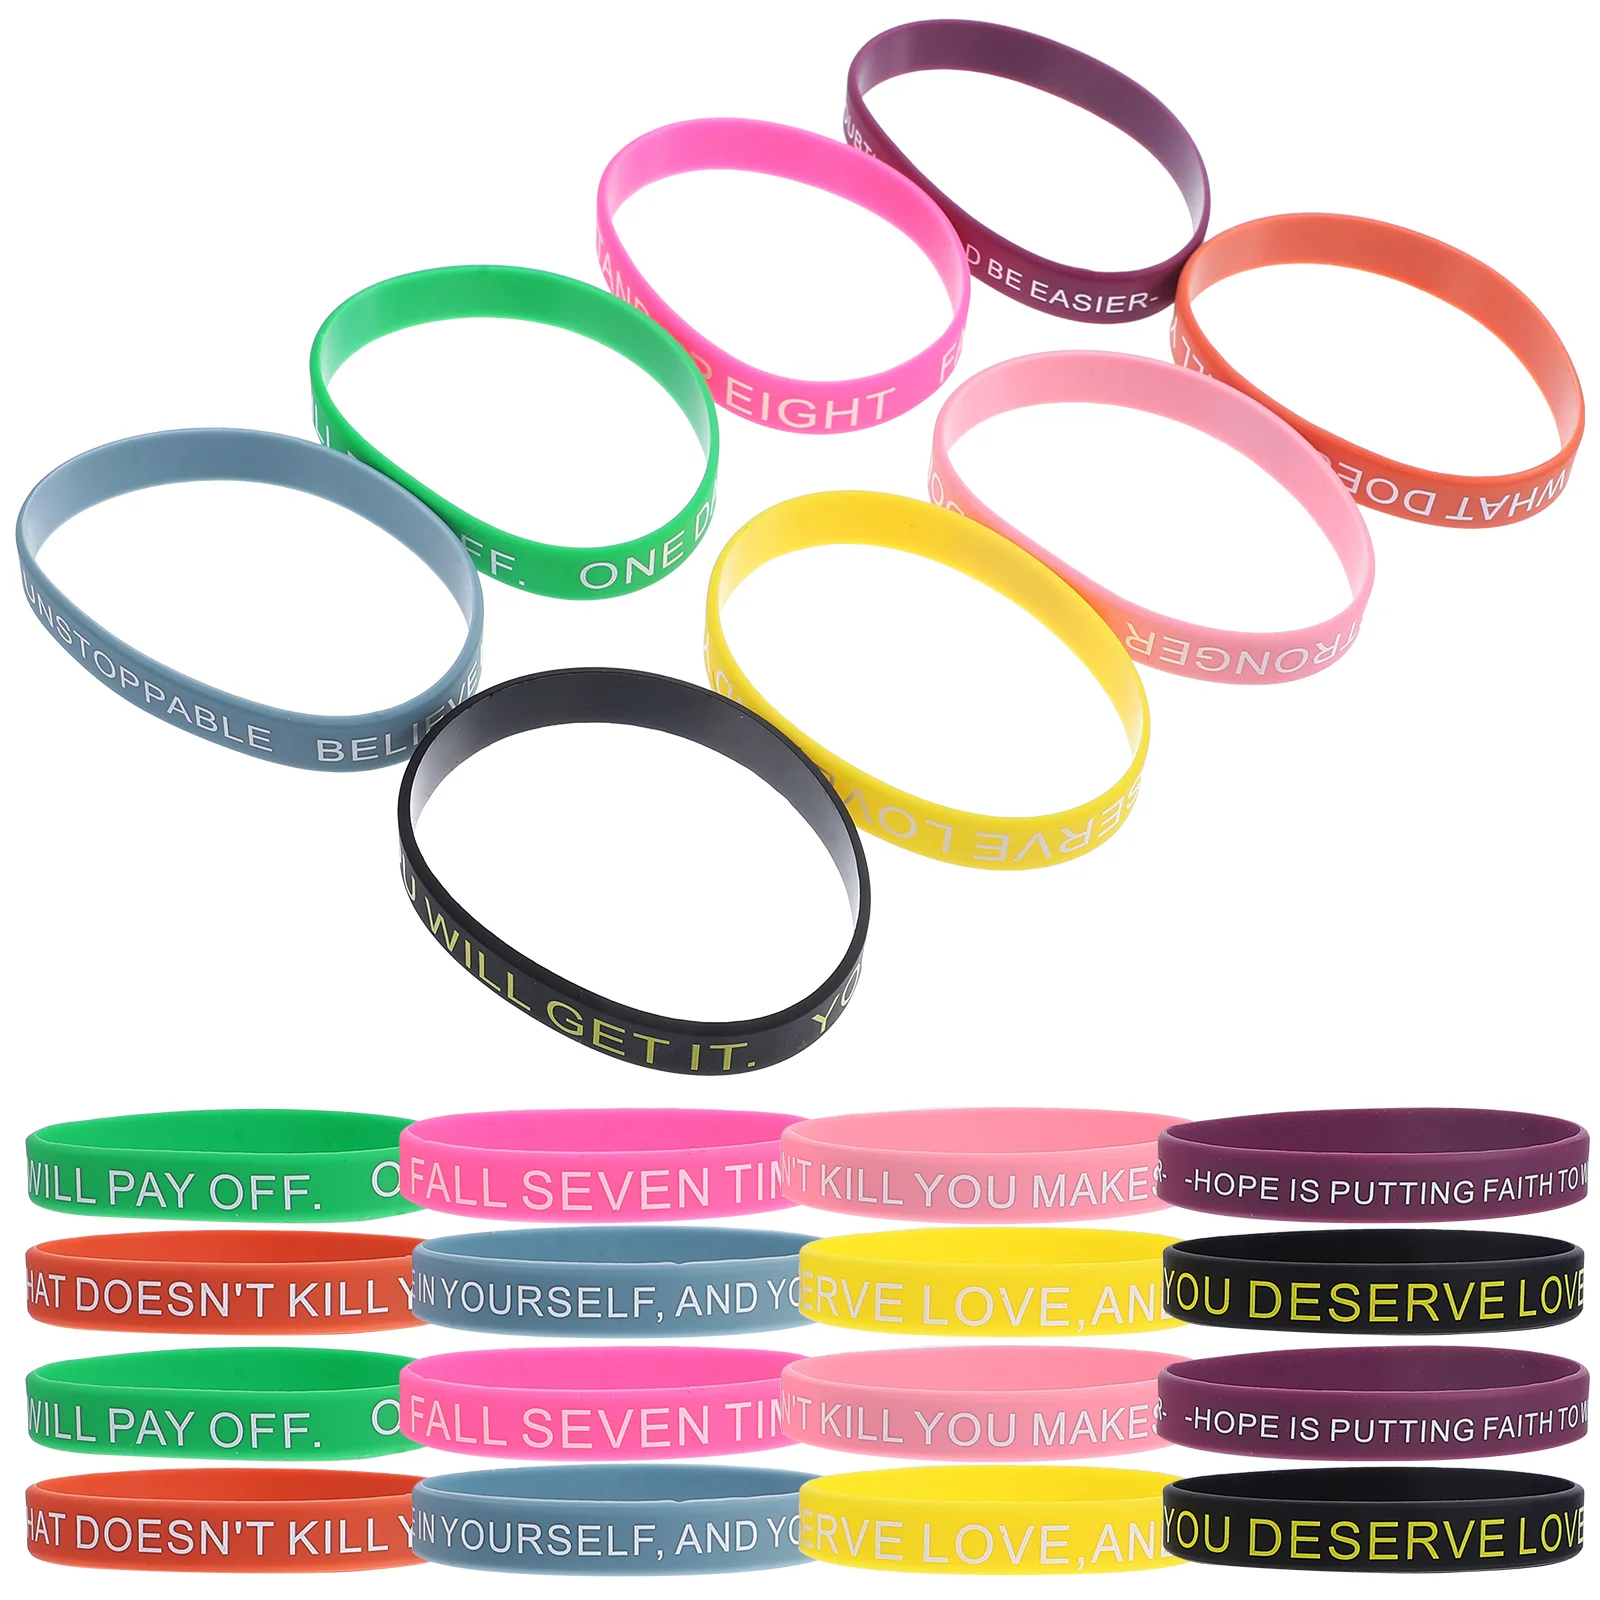 

DIY Wristband Motivational Quote Men's Bands Silicone Quotes Bracelets Wristbands Inspirational Straps Unisex